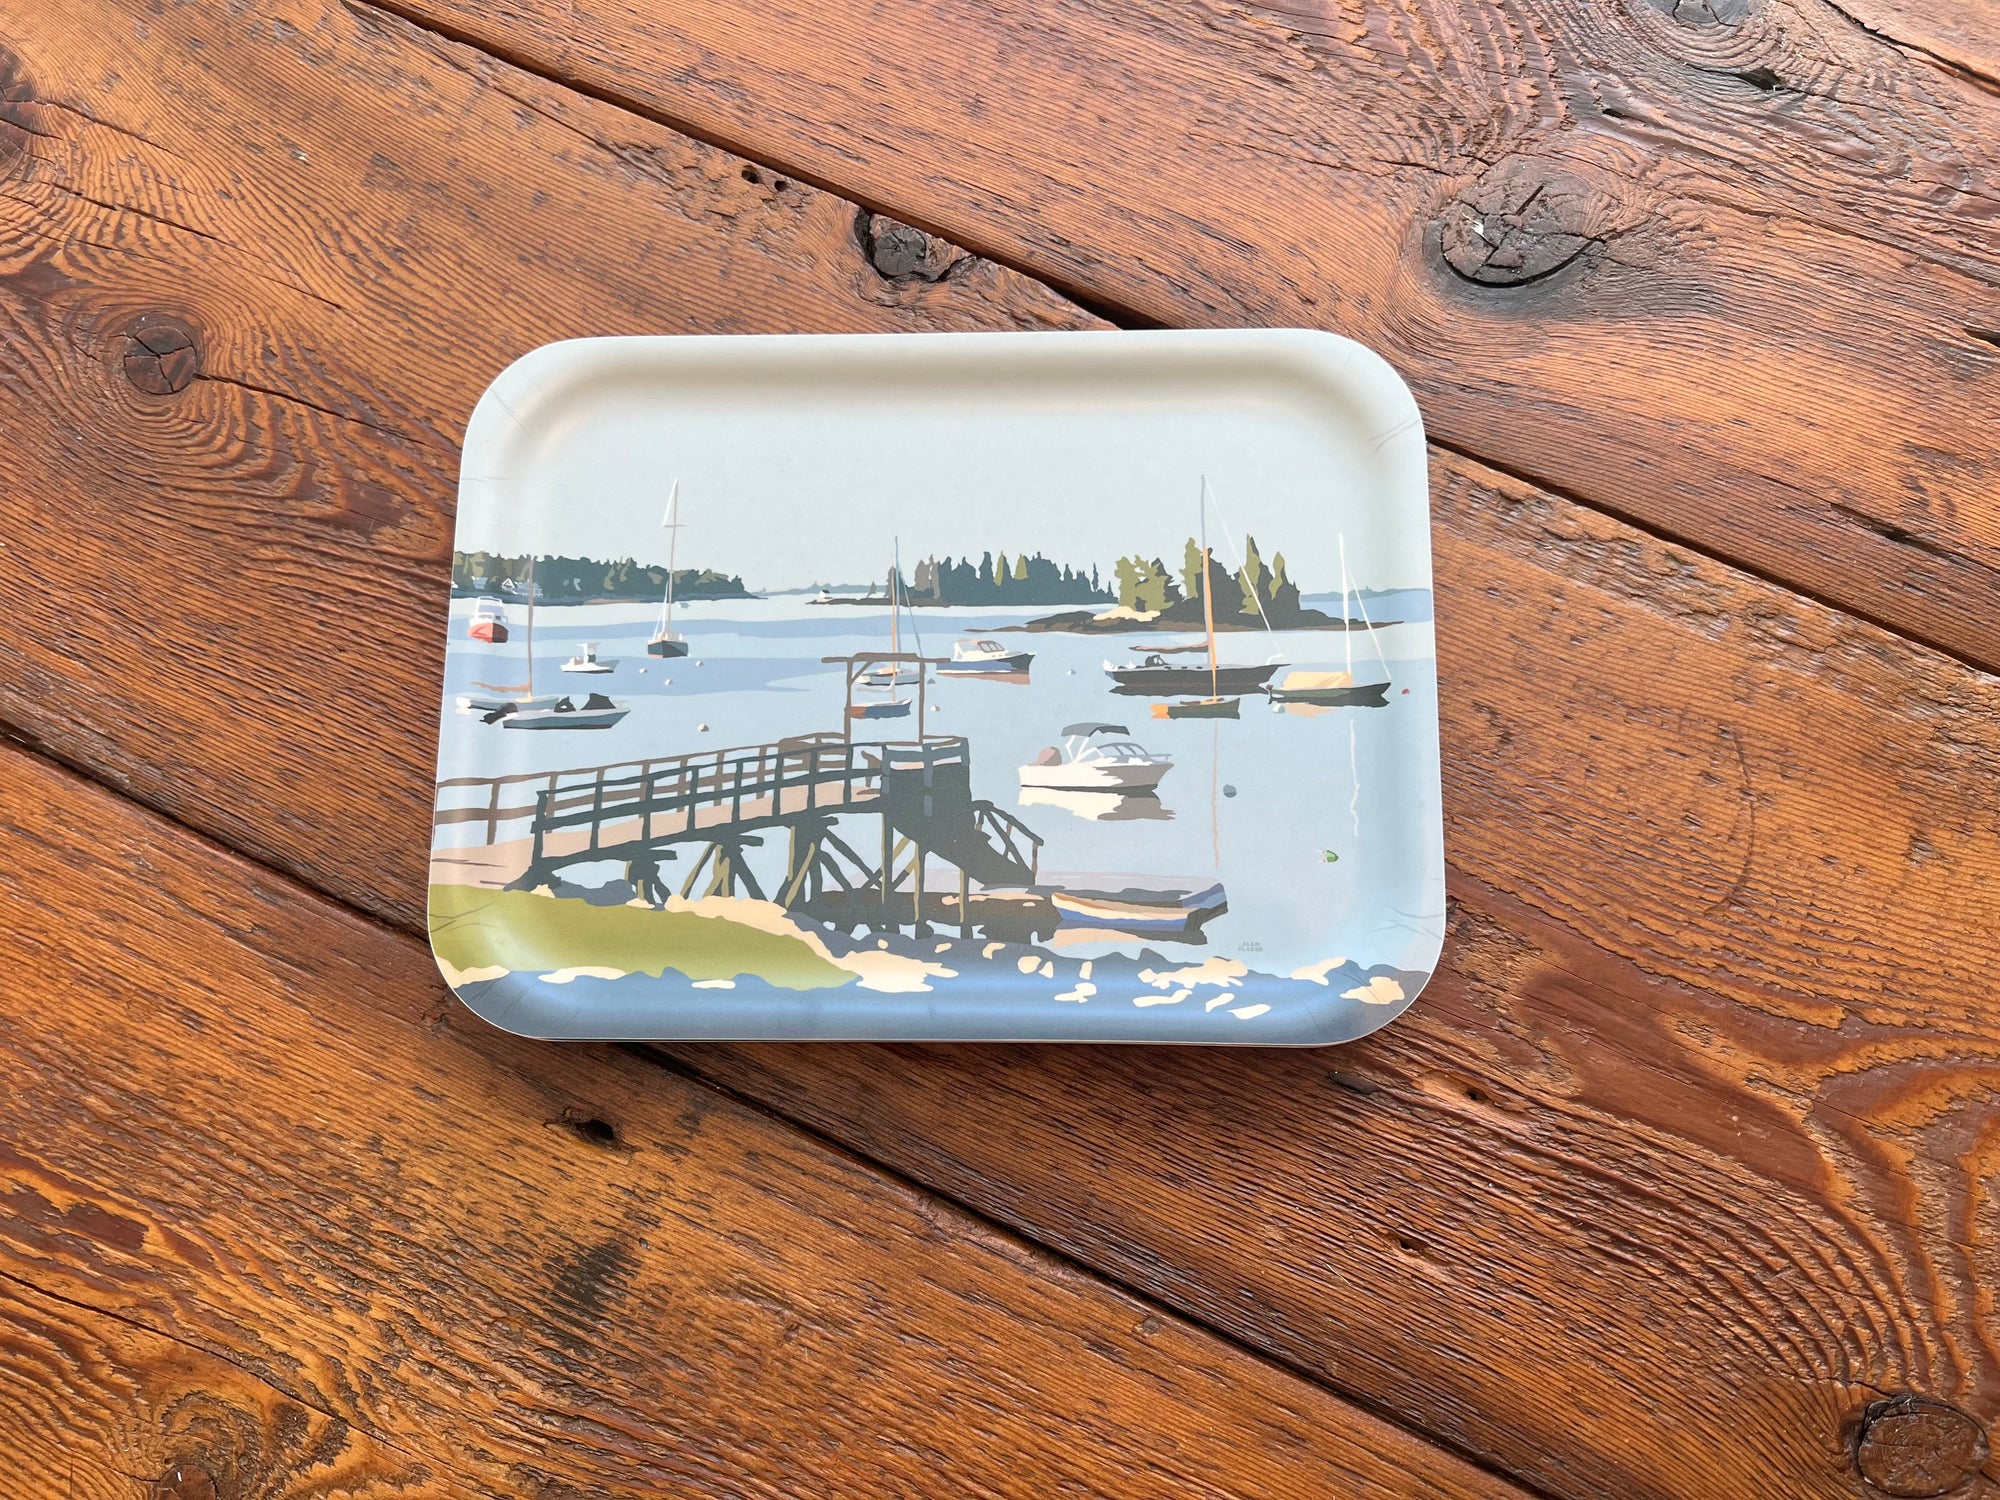 Sailboats in Boothbay Harbor Tray